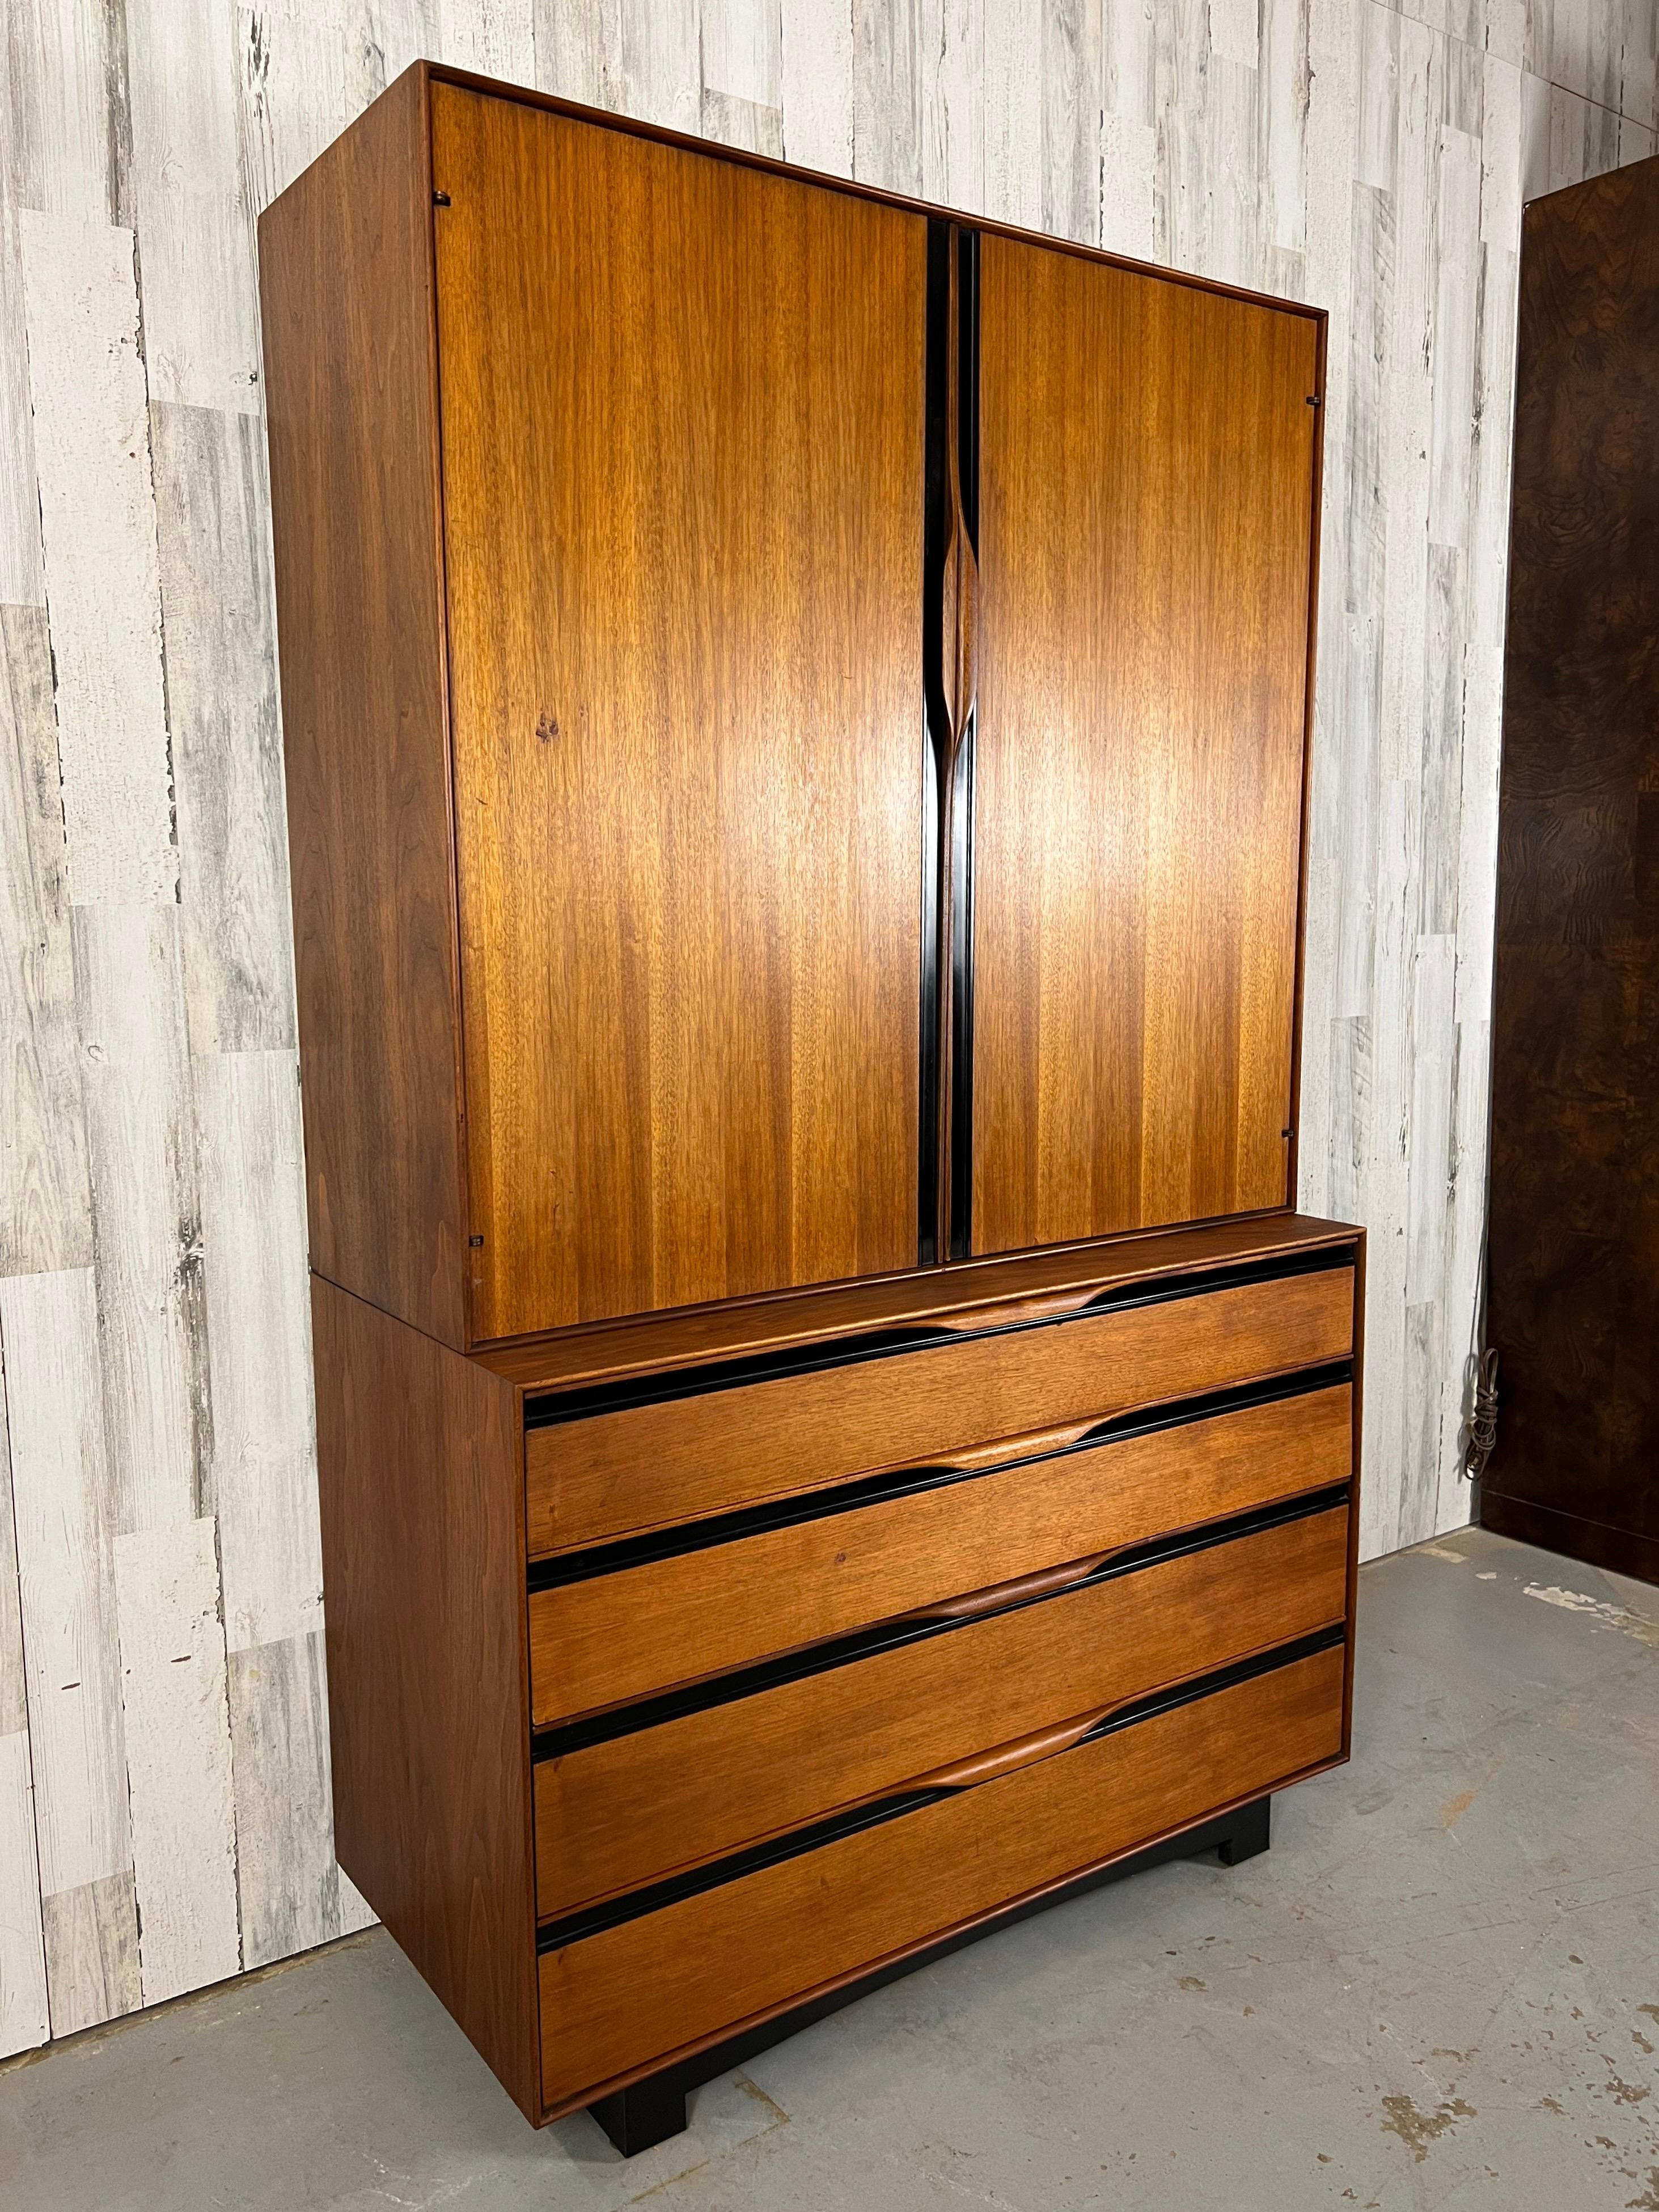 Original condition John Kapel Designed tall wardrobe with adjustable shelves in the upper cabinet and central mirror concealing two more shelves. Easy gliding drawers in the lower cabinet with vintage psychedelic shelf paper.
 